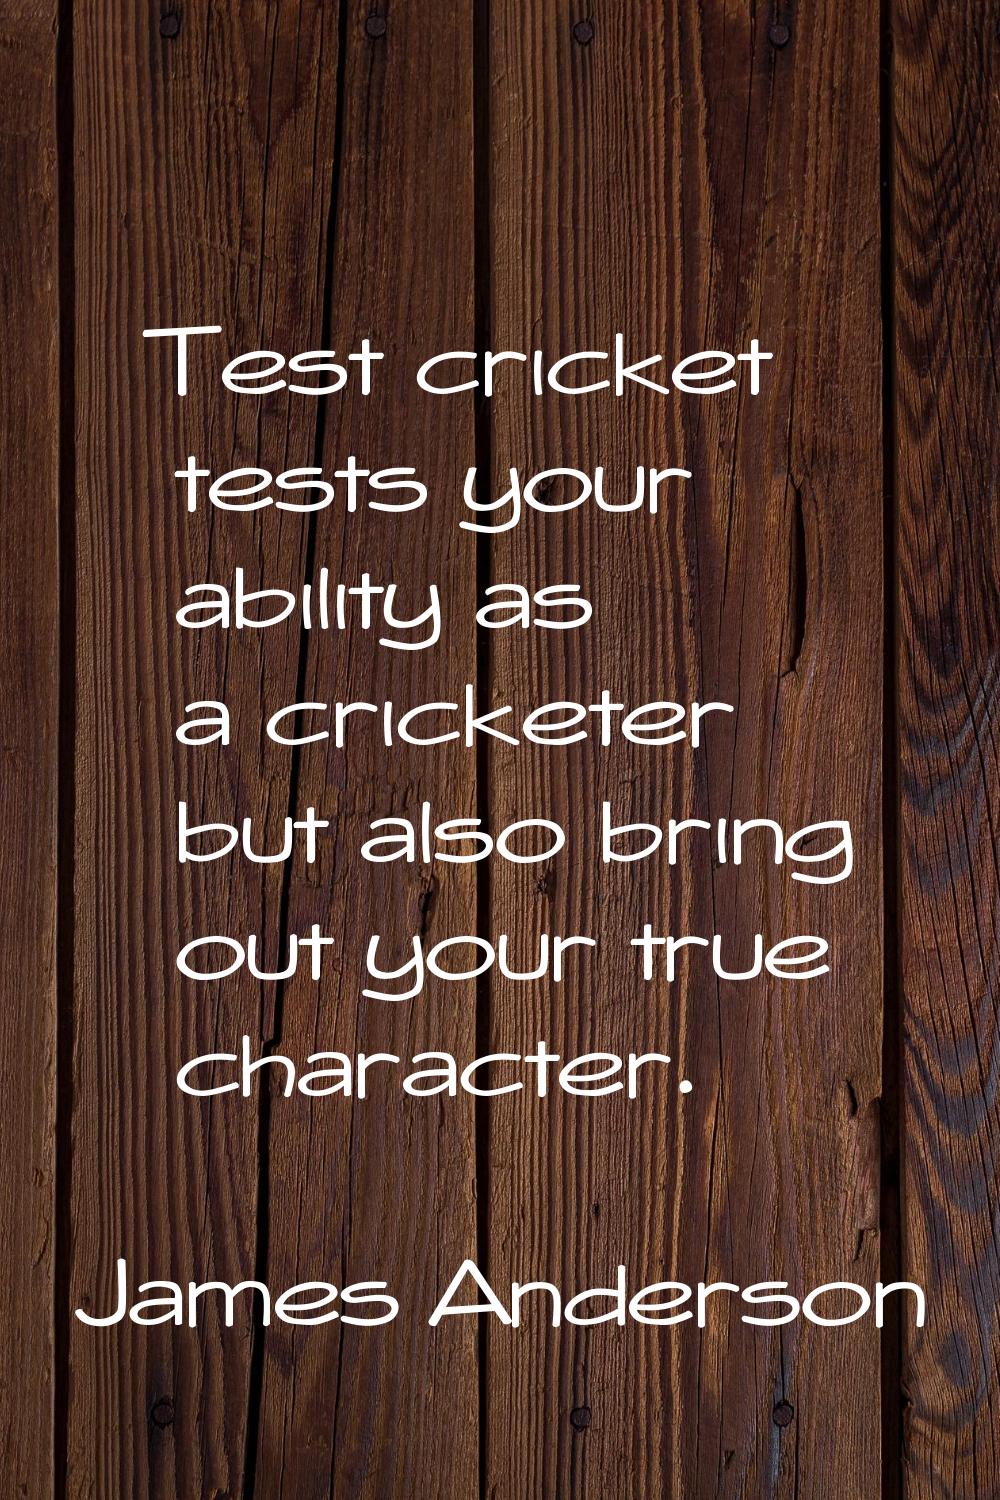 Test cricket tests your ability as a cricketer but also bring out your true character.